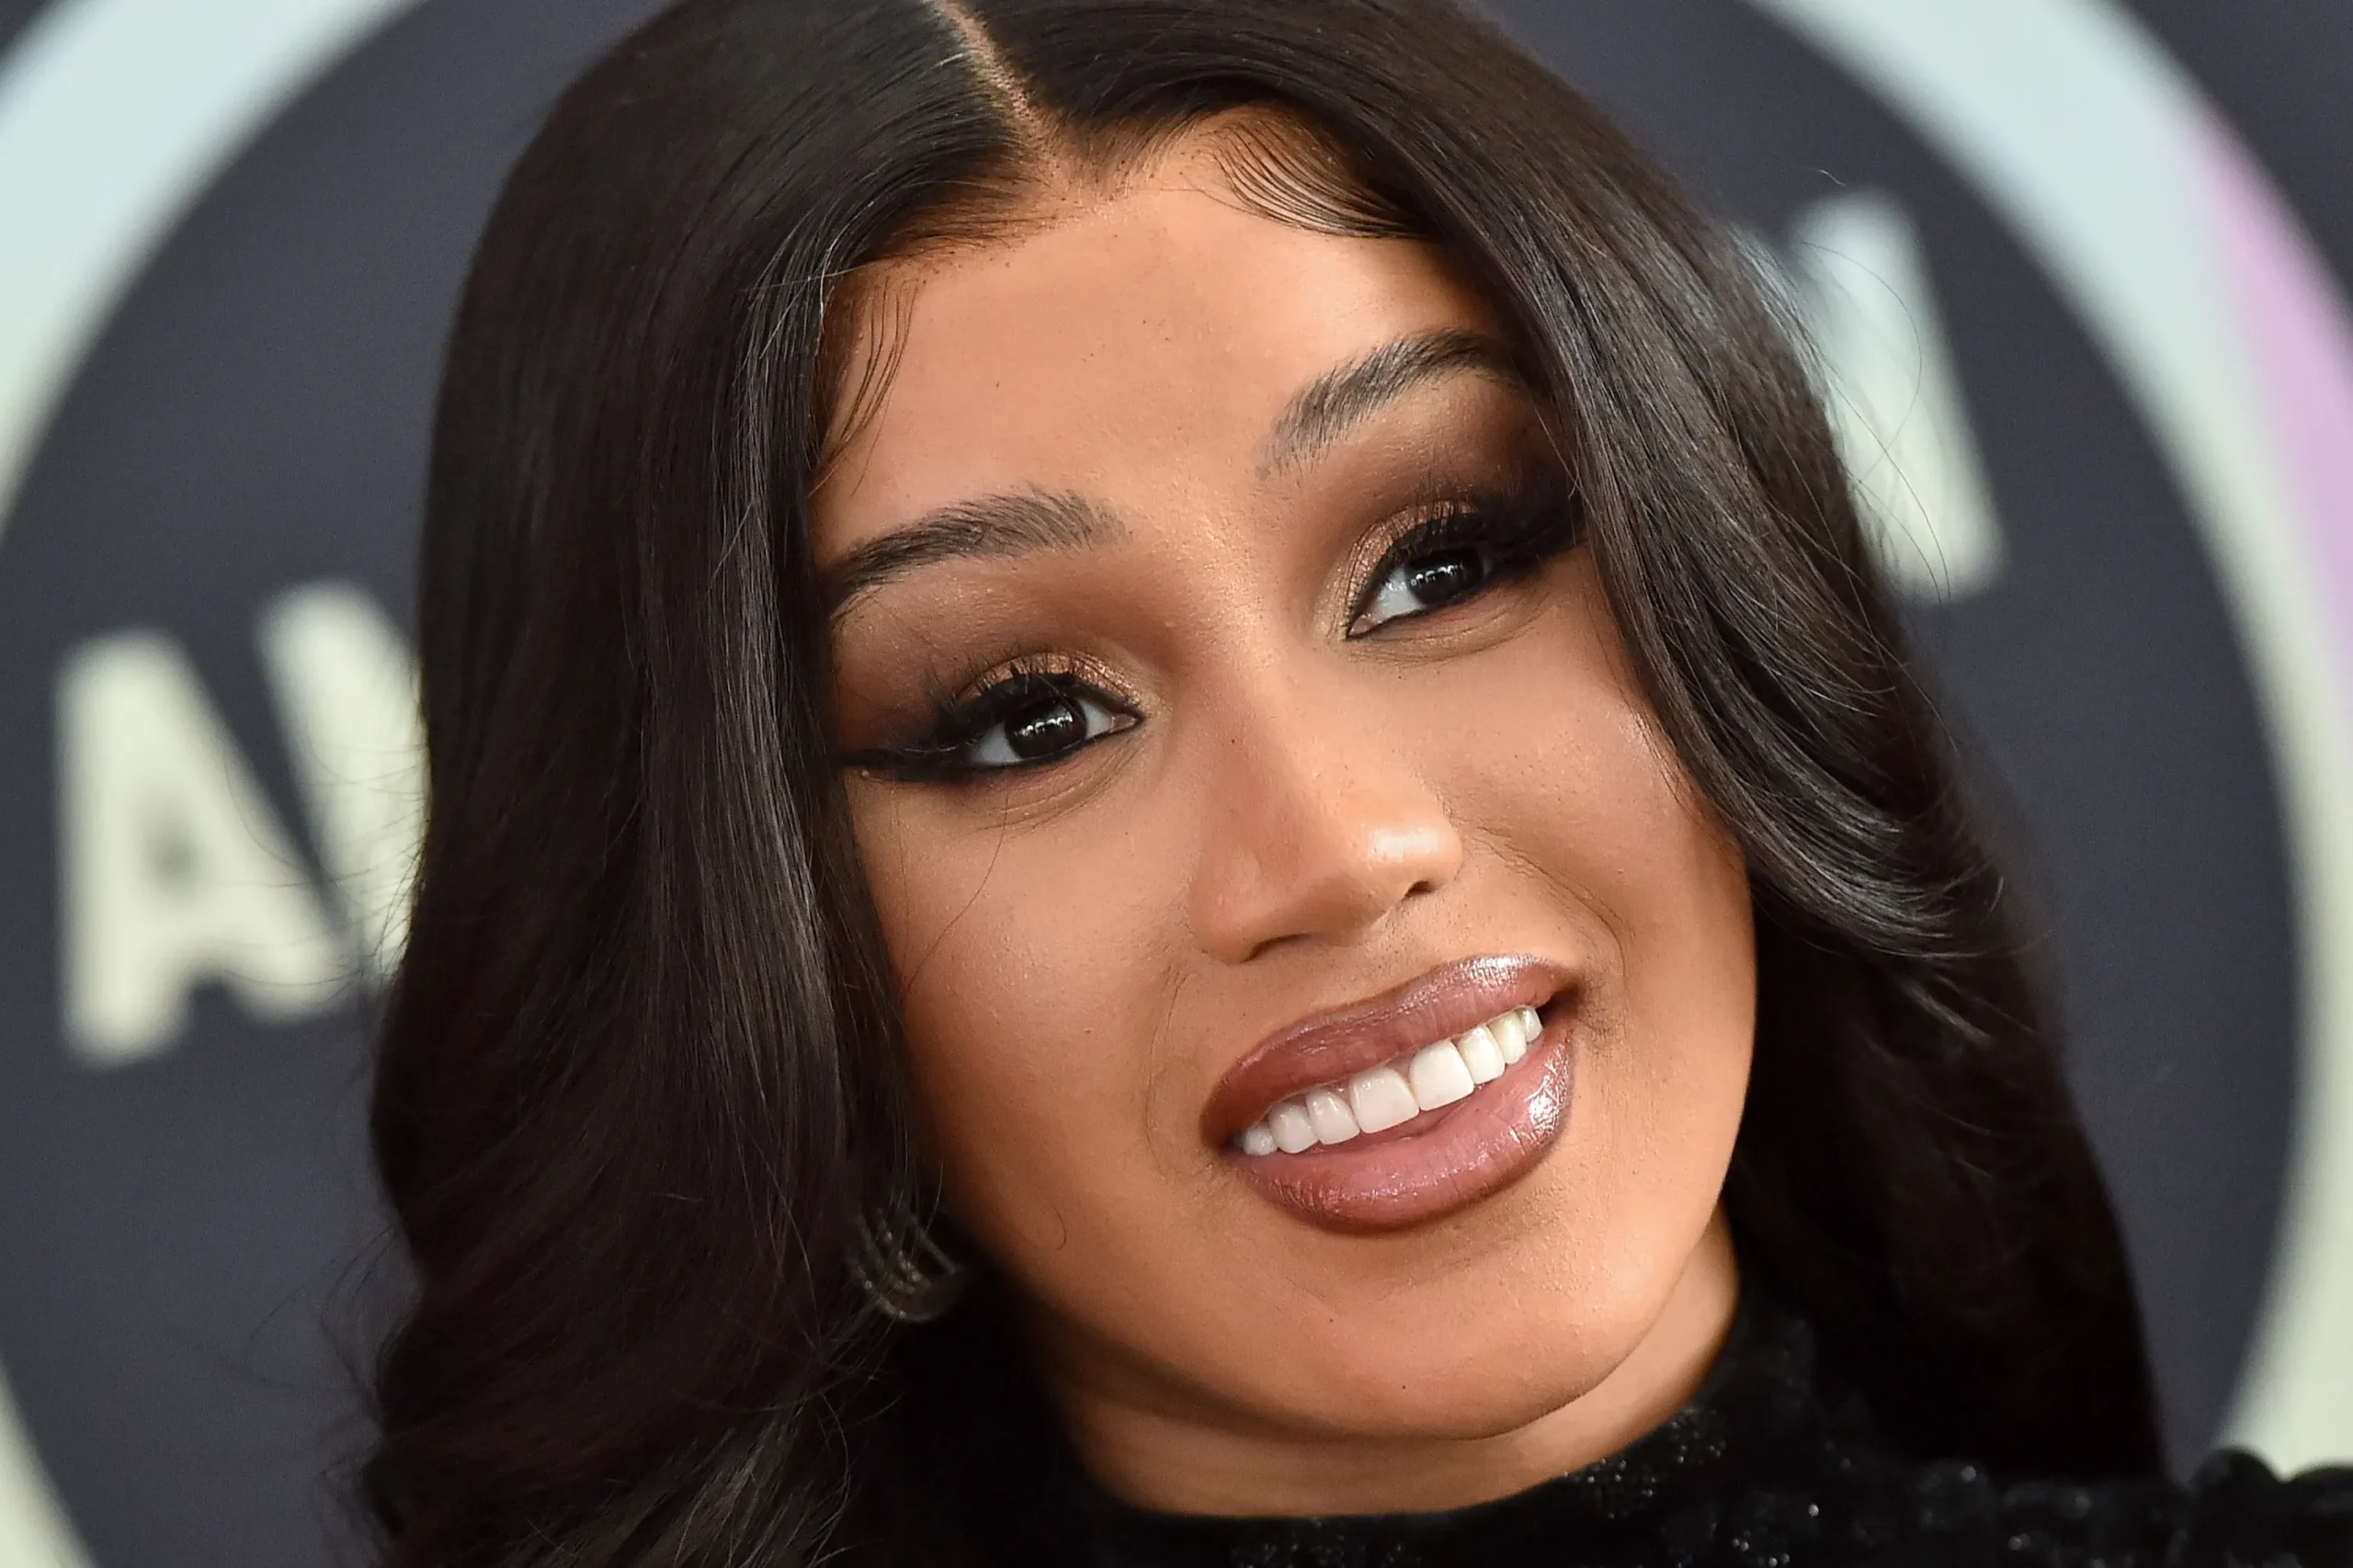 Cardi B’s Alleged Assault Victim Accuses Rapper of Using Her ‘Celebrity Status’ to Get Her Fired After Altercation